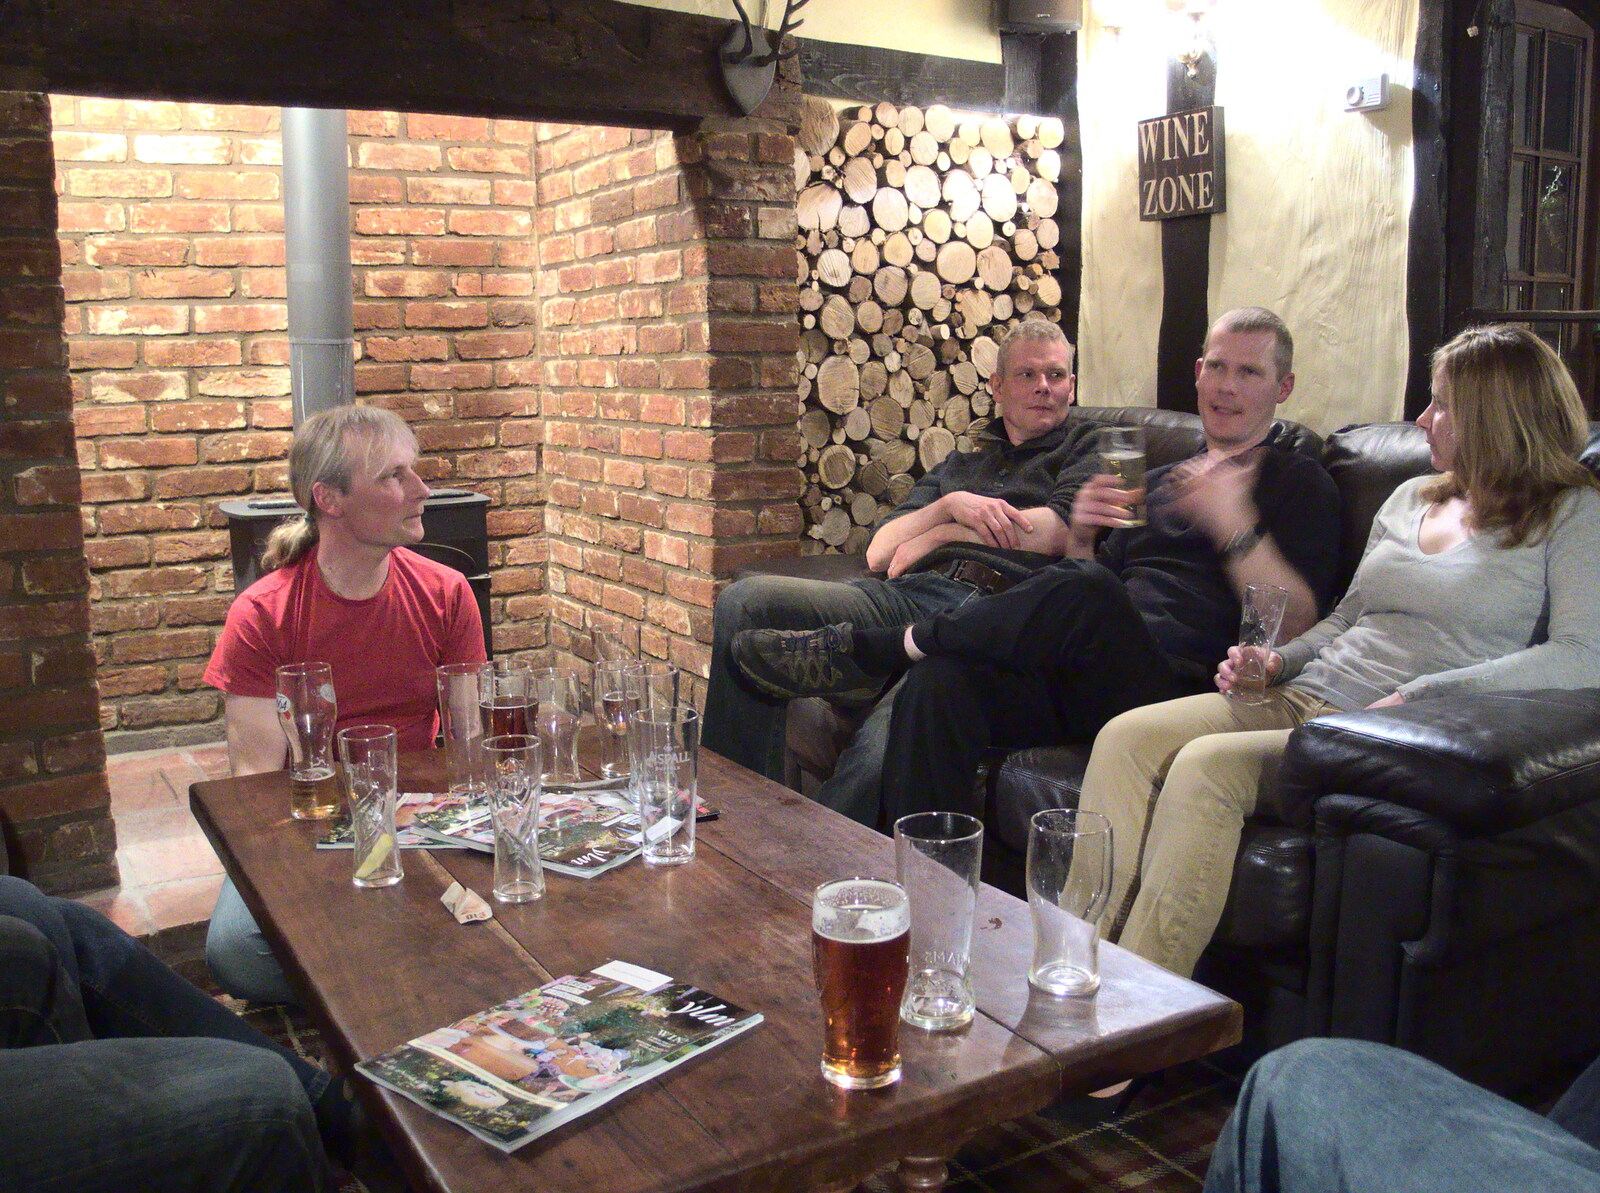 Andy discusses stuff from The Last Day of Pre-School and Beer at the Trowel and Hammer, Cotton, Suffolk - 29th March 2015